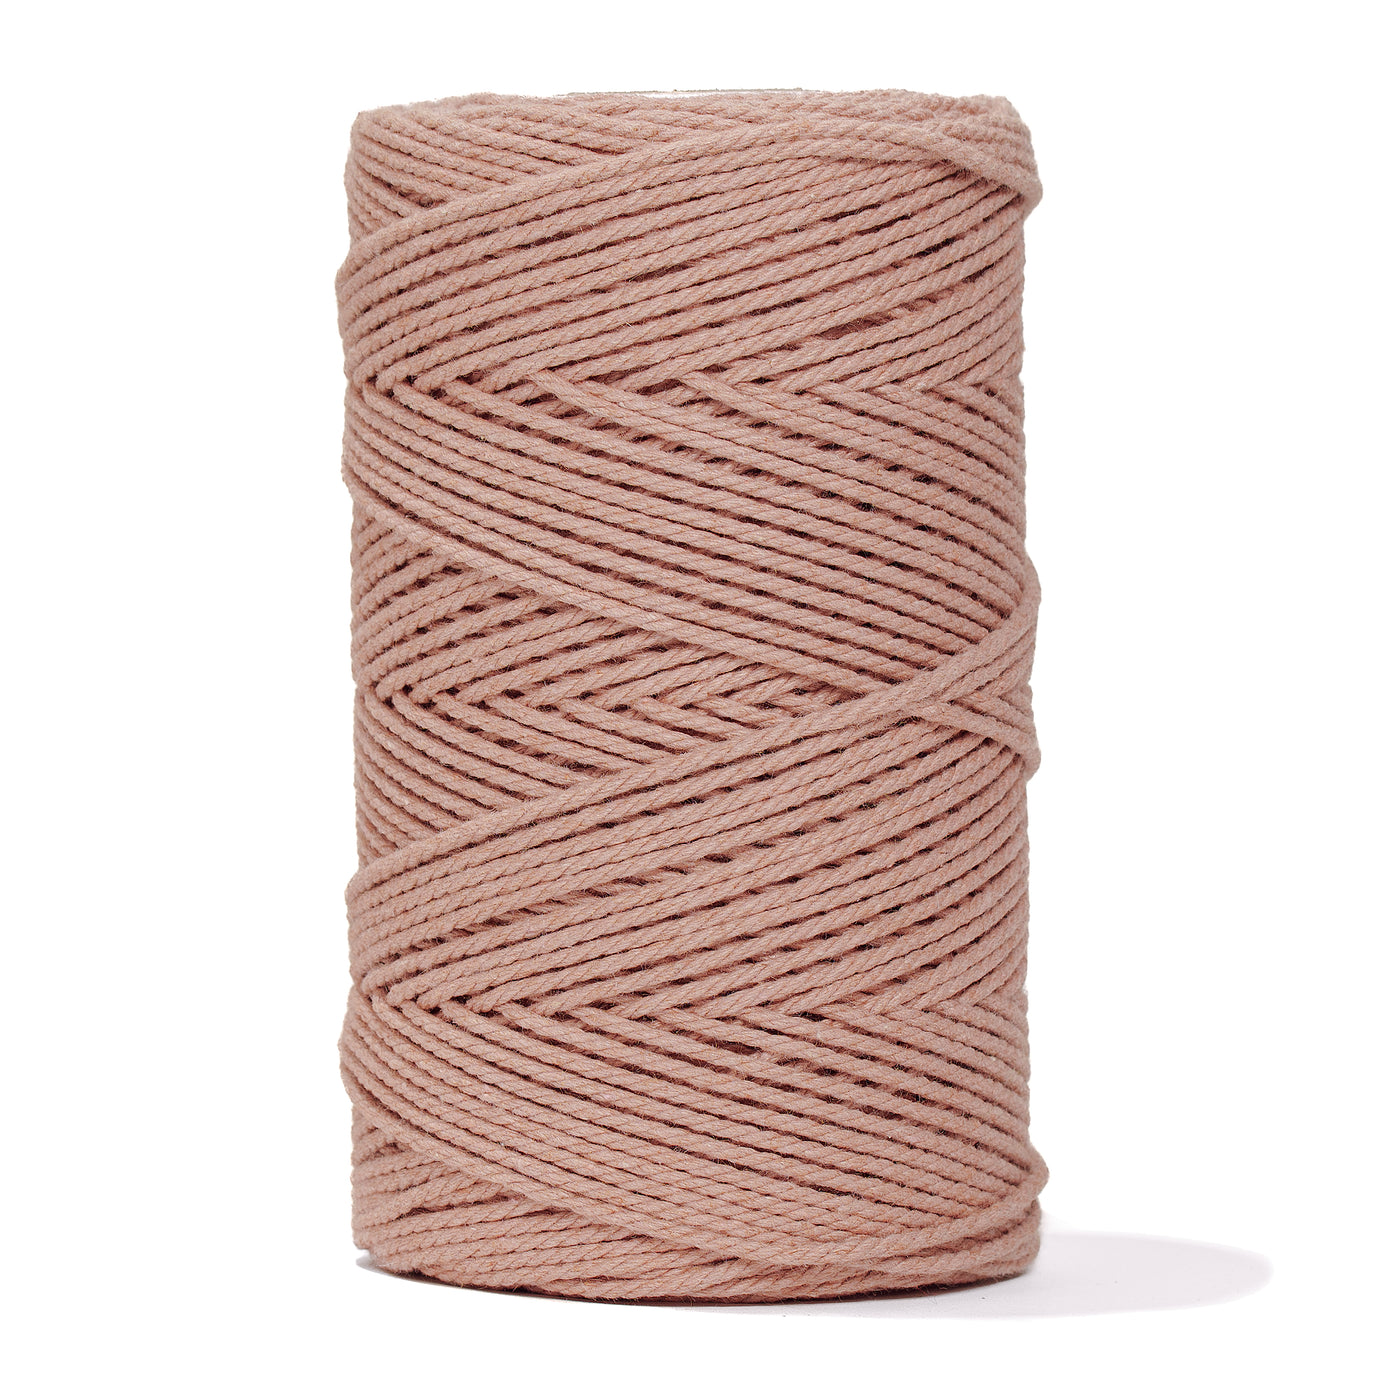 COTTON ROPE ZERO WASTE 2 MM - 3 PLY - DUSTY ROSE COLOR